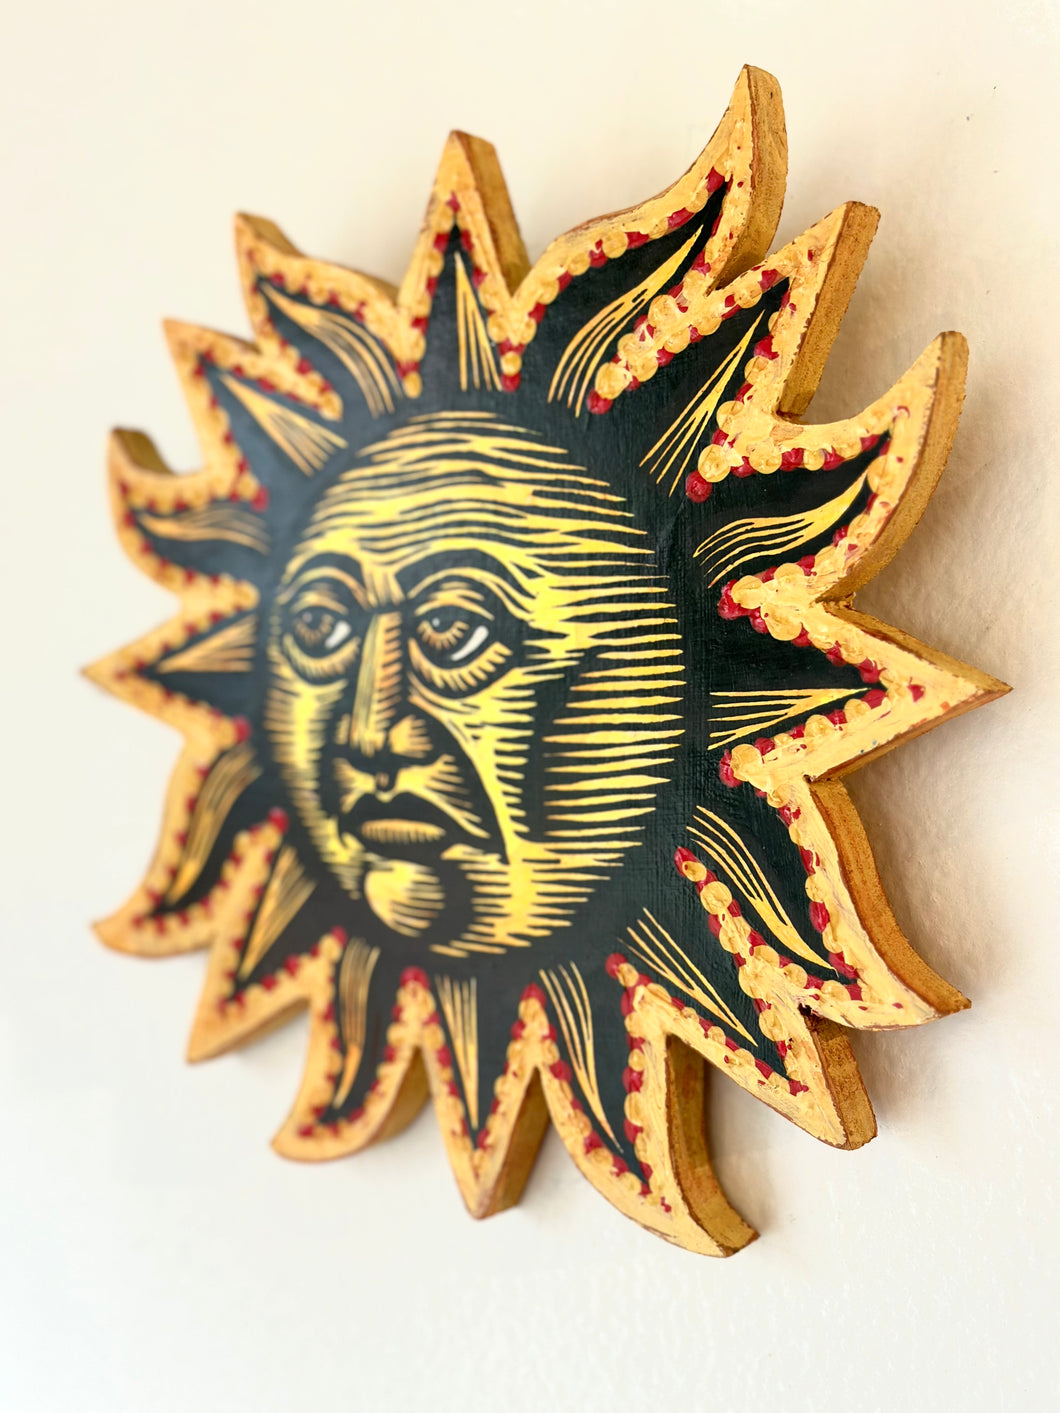 Sun with Face Print on Wood Cutout Painting